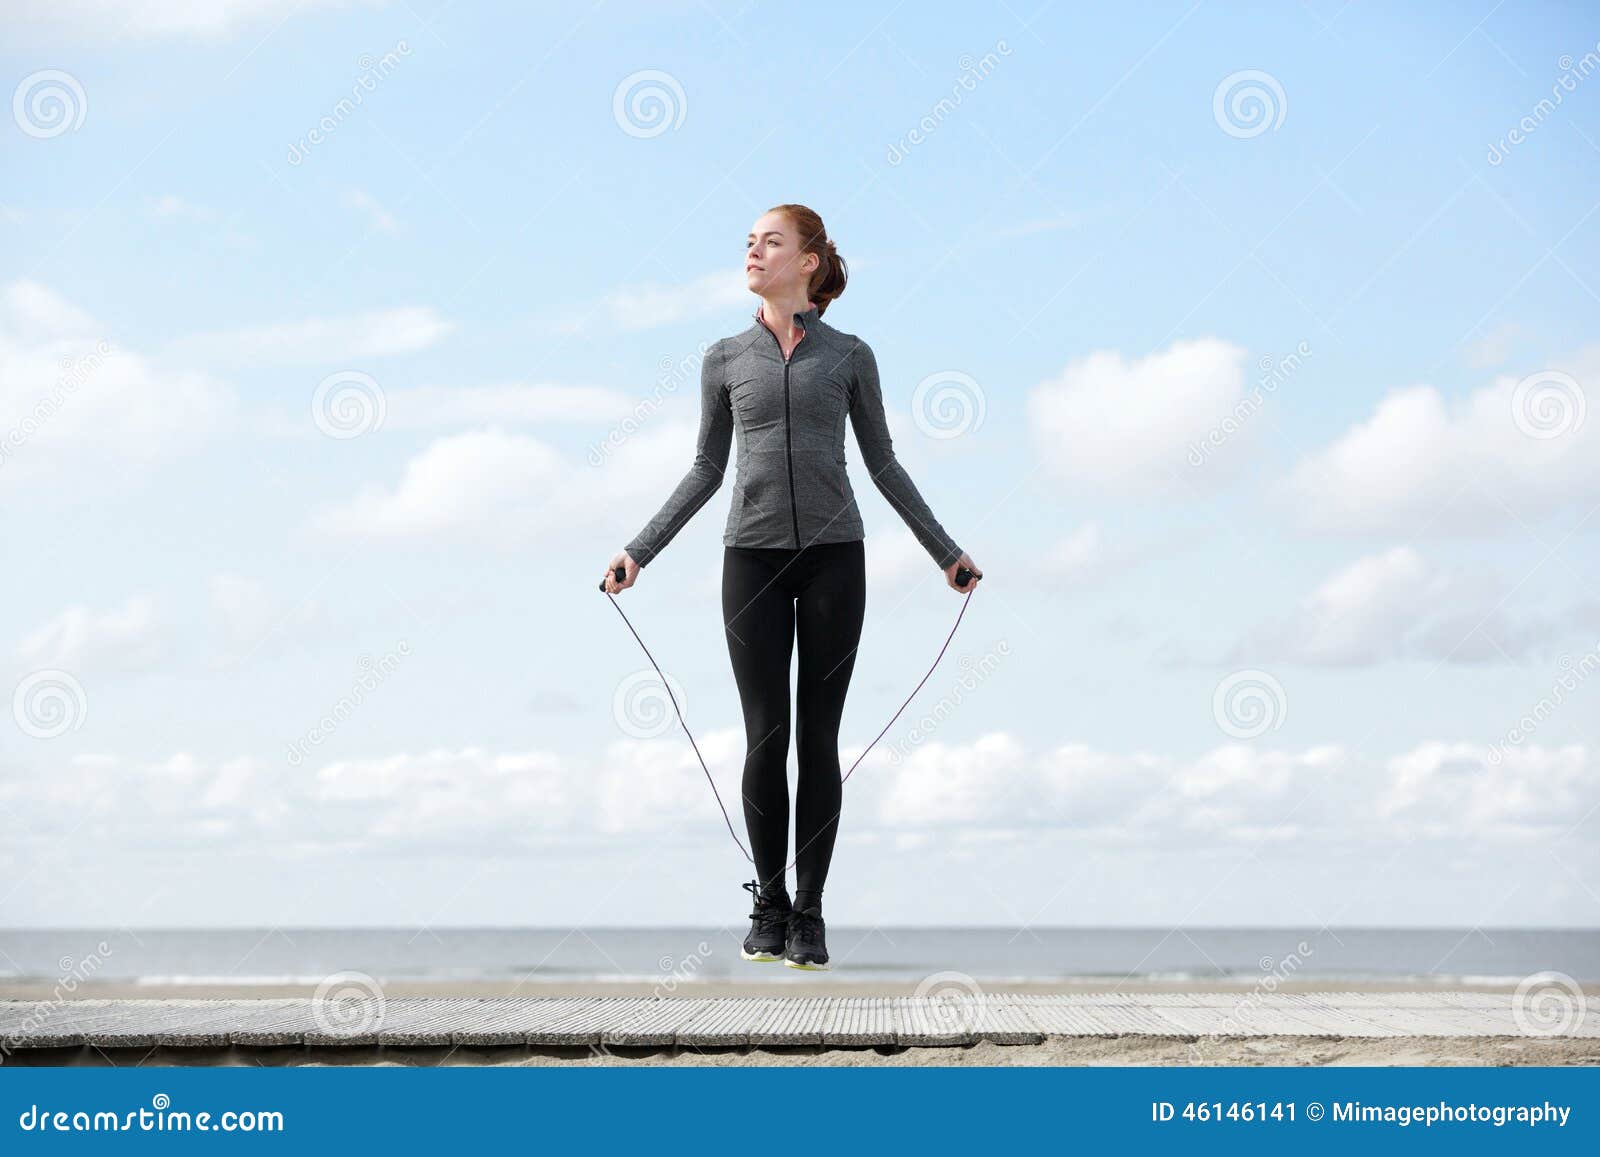 sporty woman warming up with jump rope